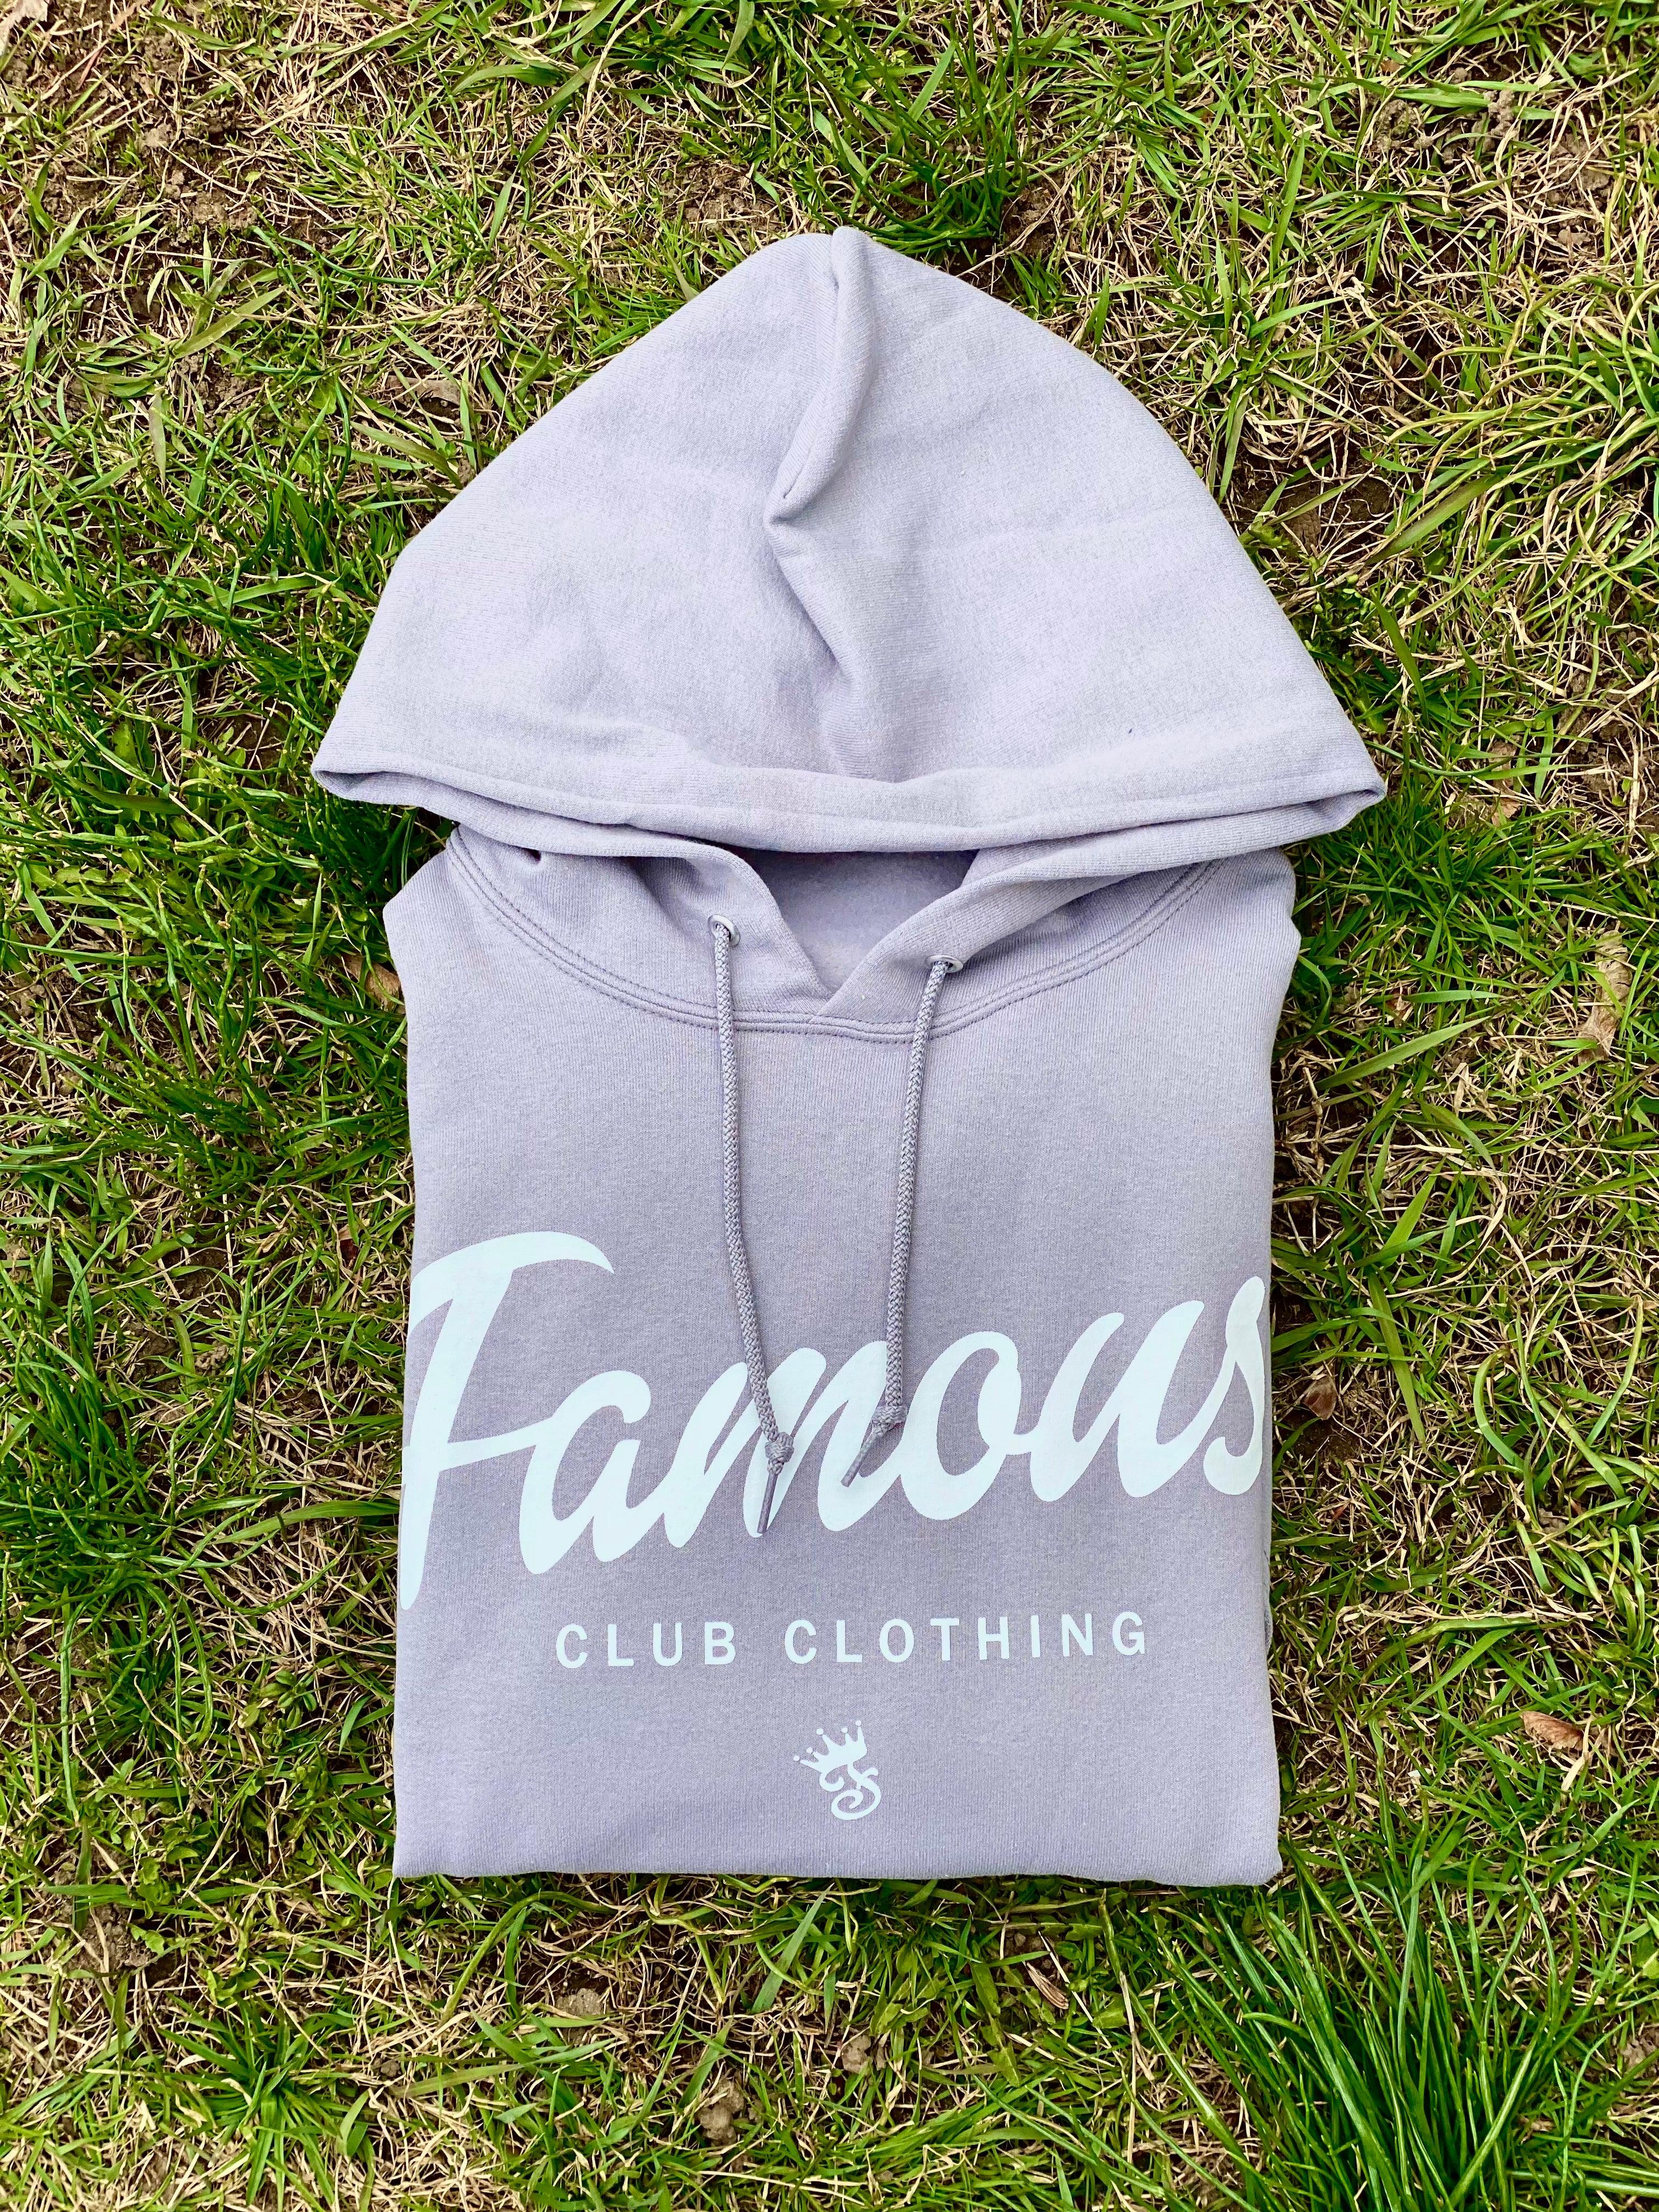 FAMOUS SCRIPT SALMON & OYSTERS - Famous Club Clothing